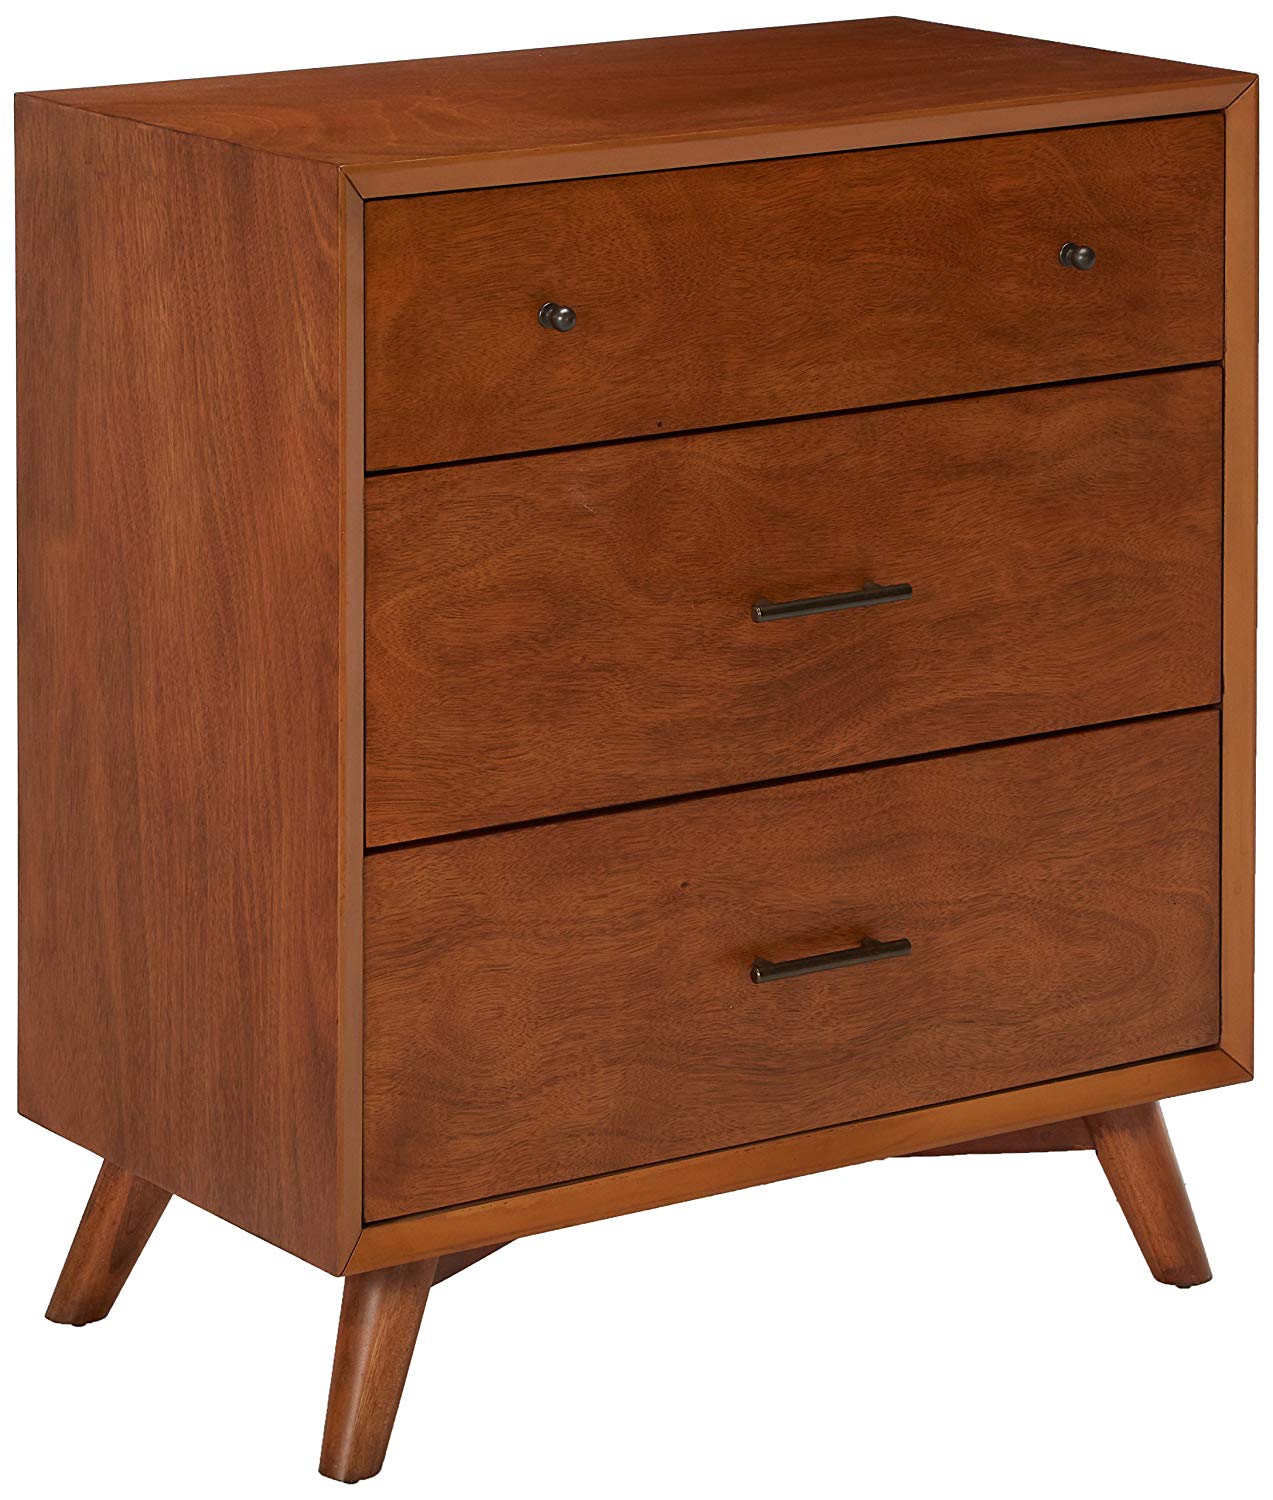 drawer combo autumn dresser ellie for assembly target modern proof liners delightful darley pulls baby clarissa quinn knobs heavenly accent table full size mirrored cocktail real